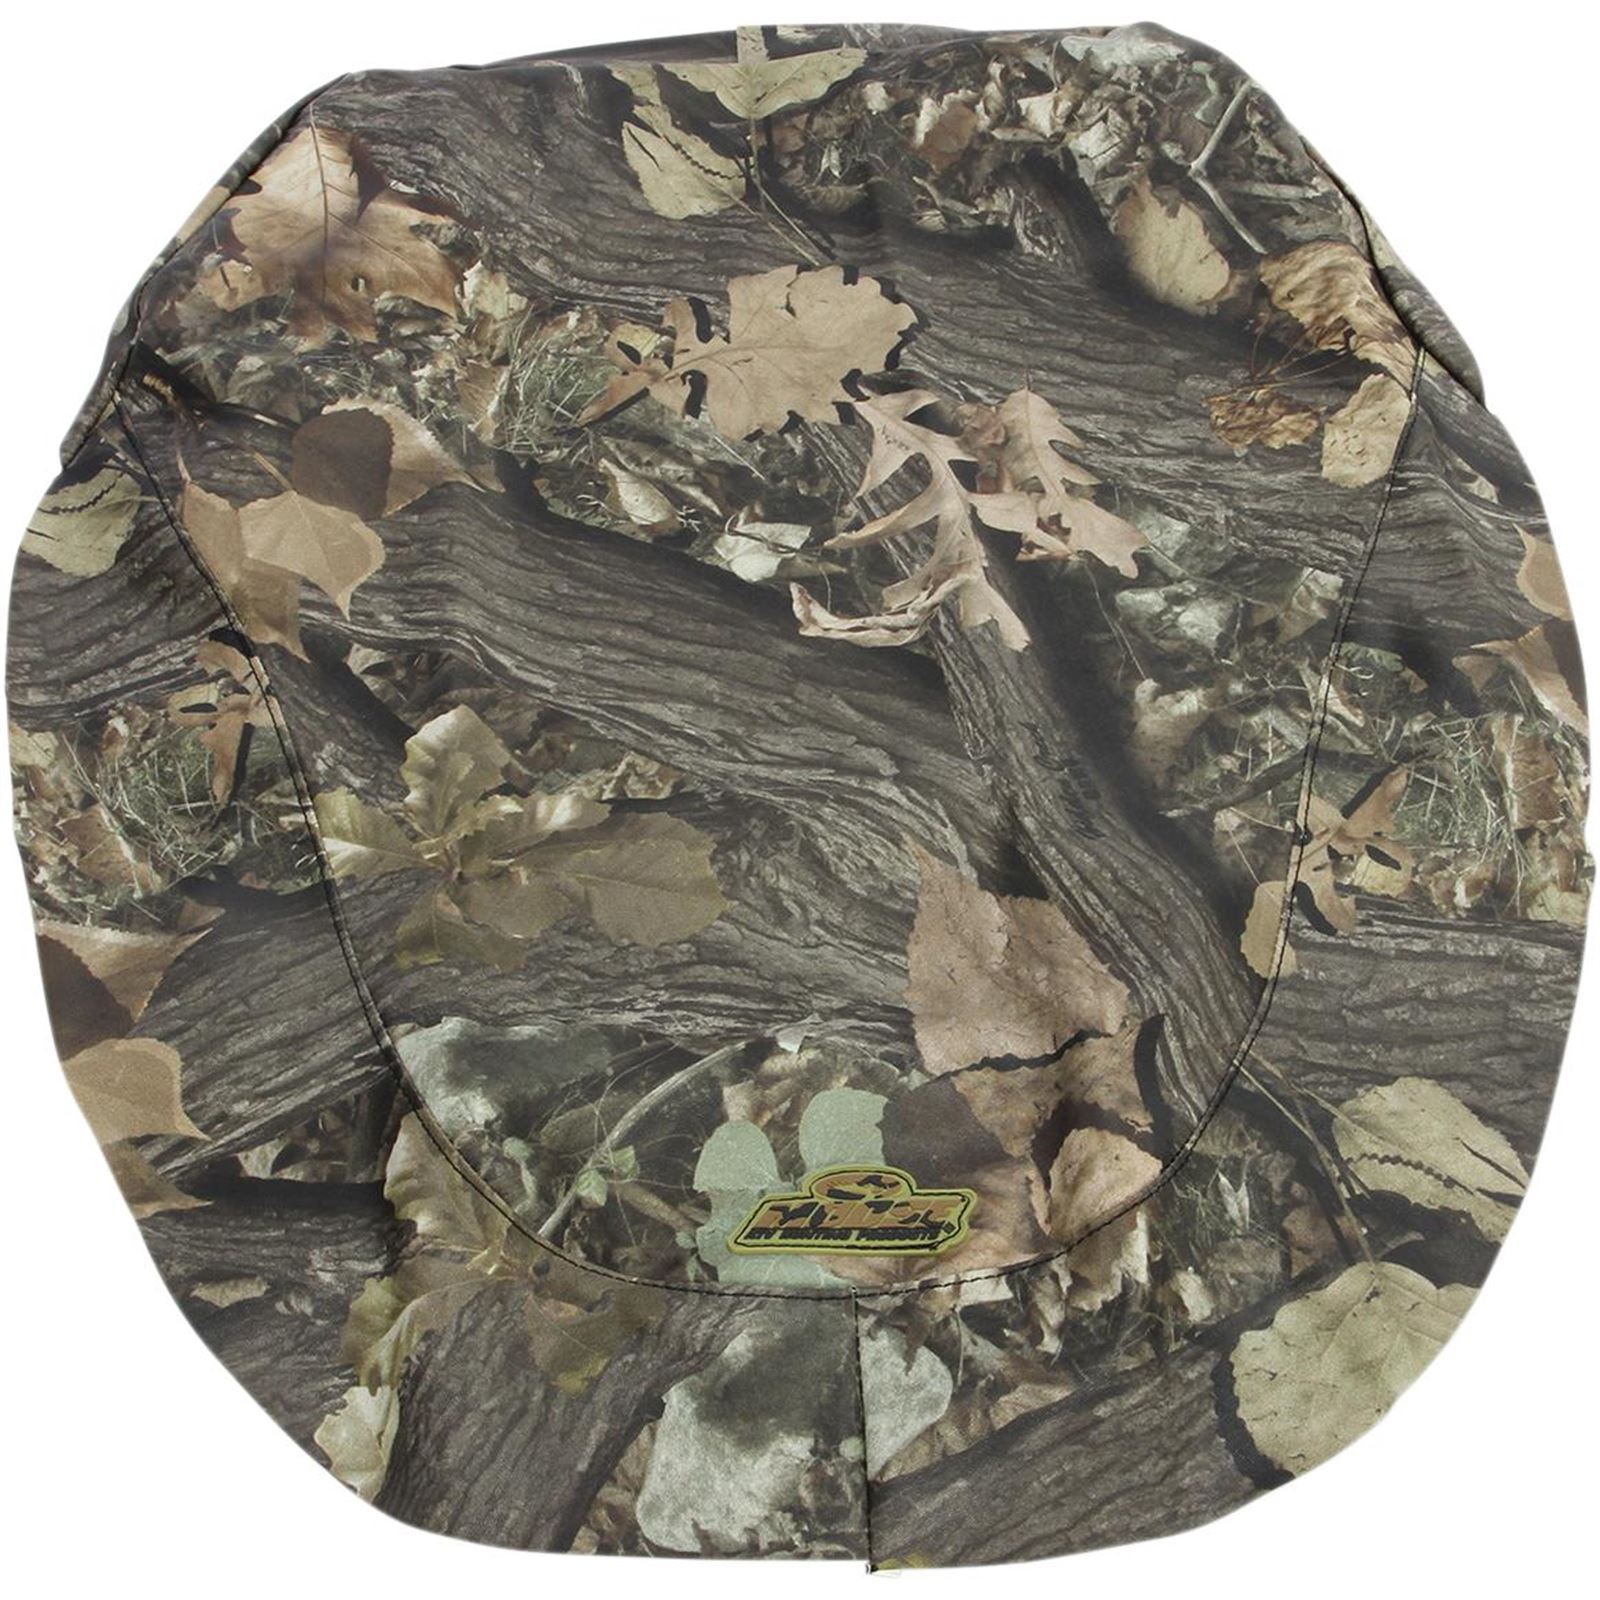 Moose Racing Seat Cover - Camo - Can-Am